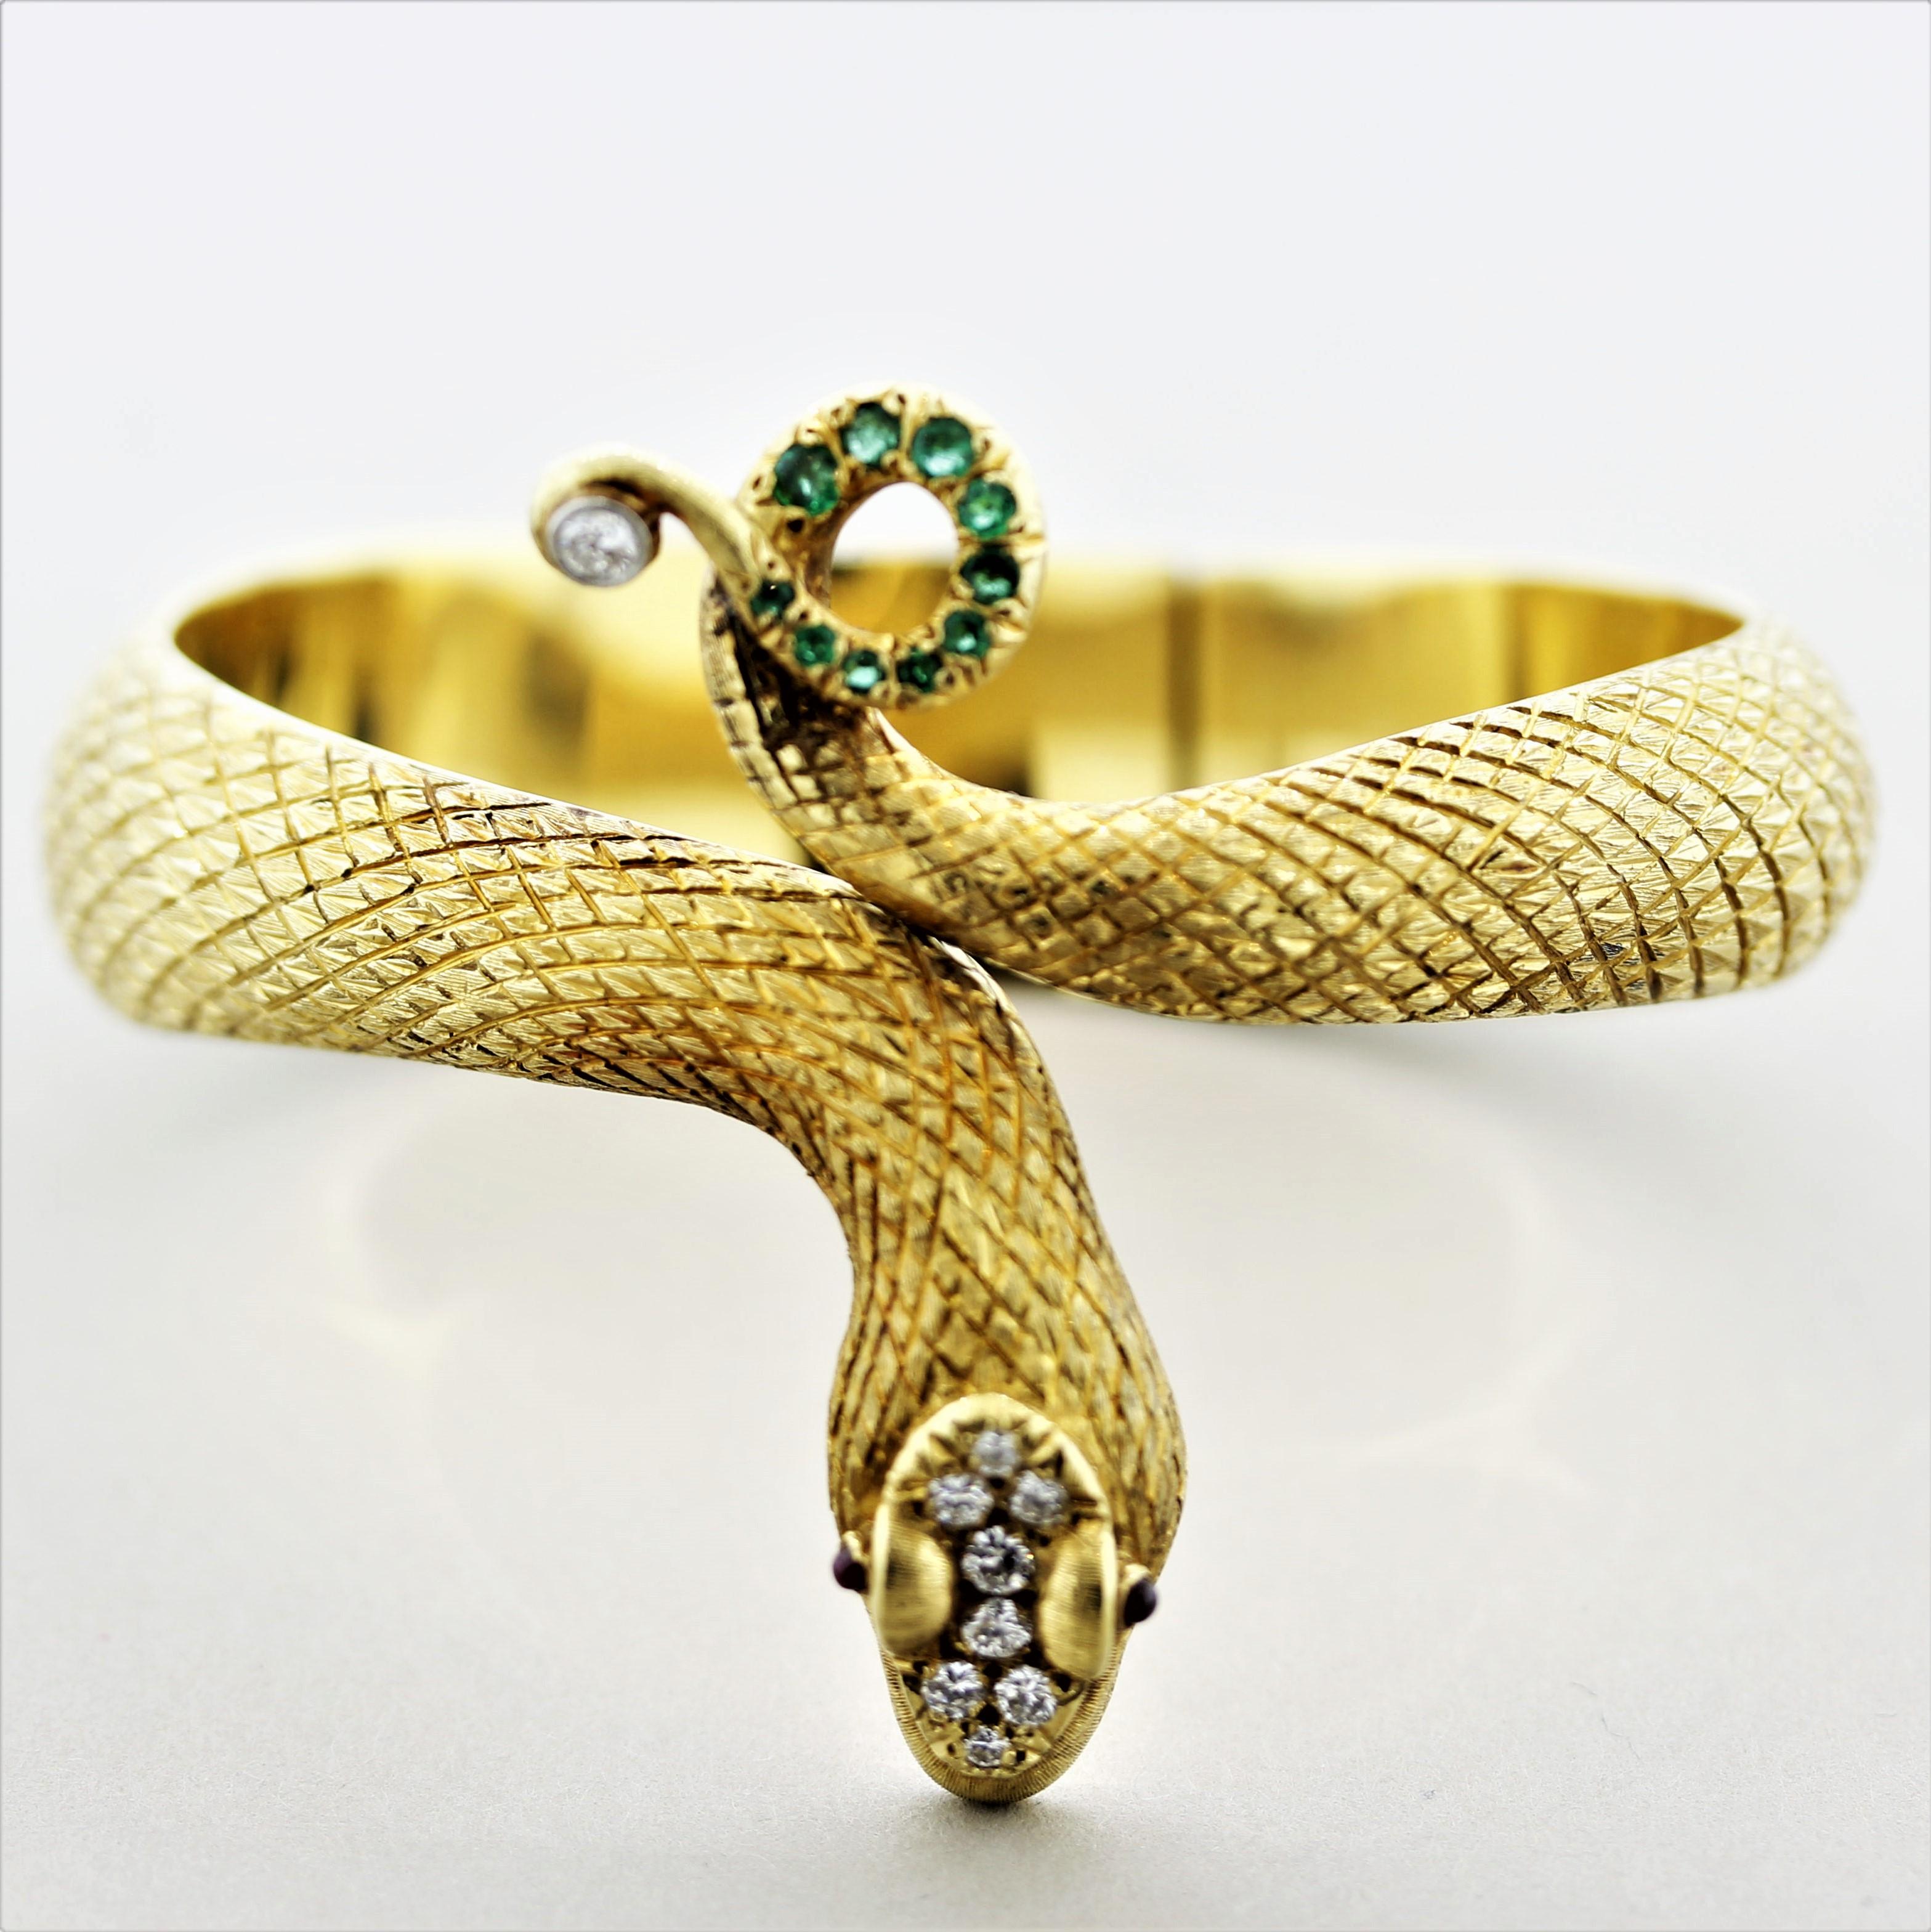 A superb estate bangle snake set with diamonds and fine colored stones. The snake is made in 18k yellow gold with life-like features that sets this piece apart from the rest. The outside of the snake has hand-carved and textured scales, while its